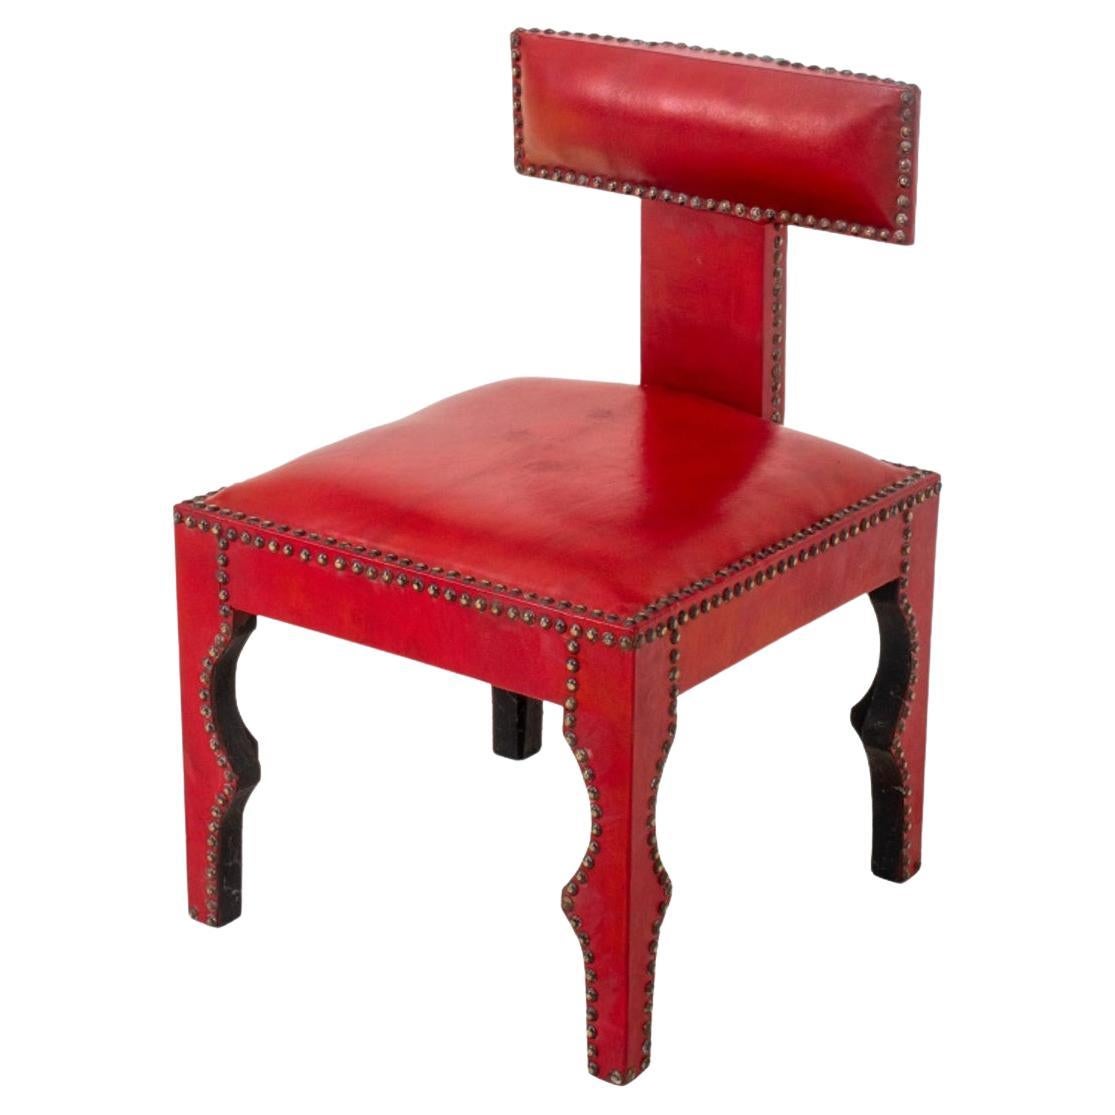 Ottoman Turkish Style Red Leather Covered Chair For Sale